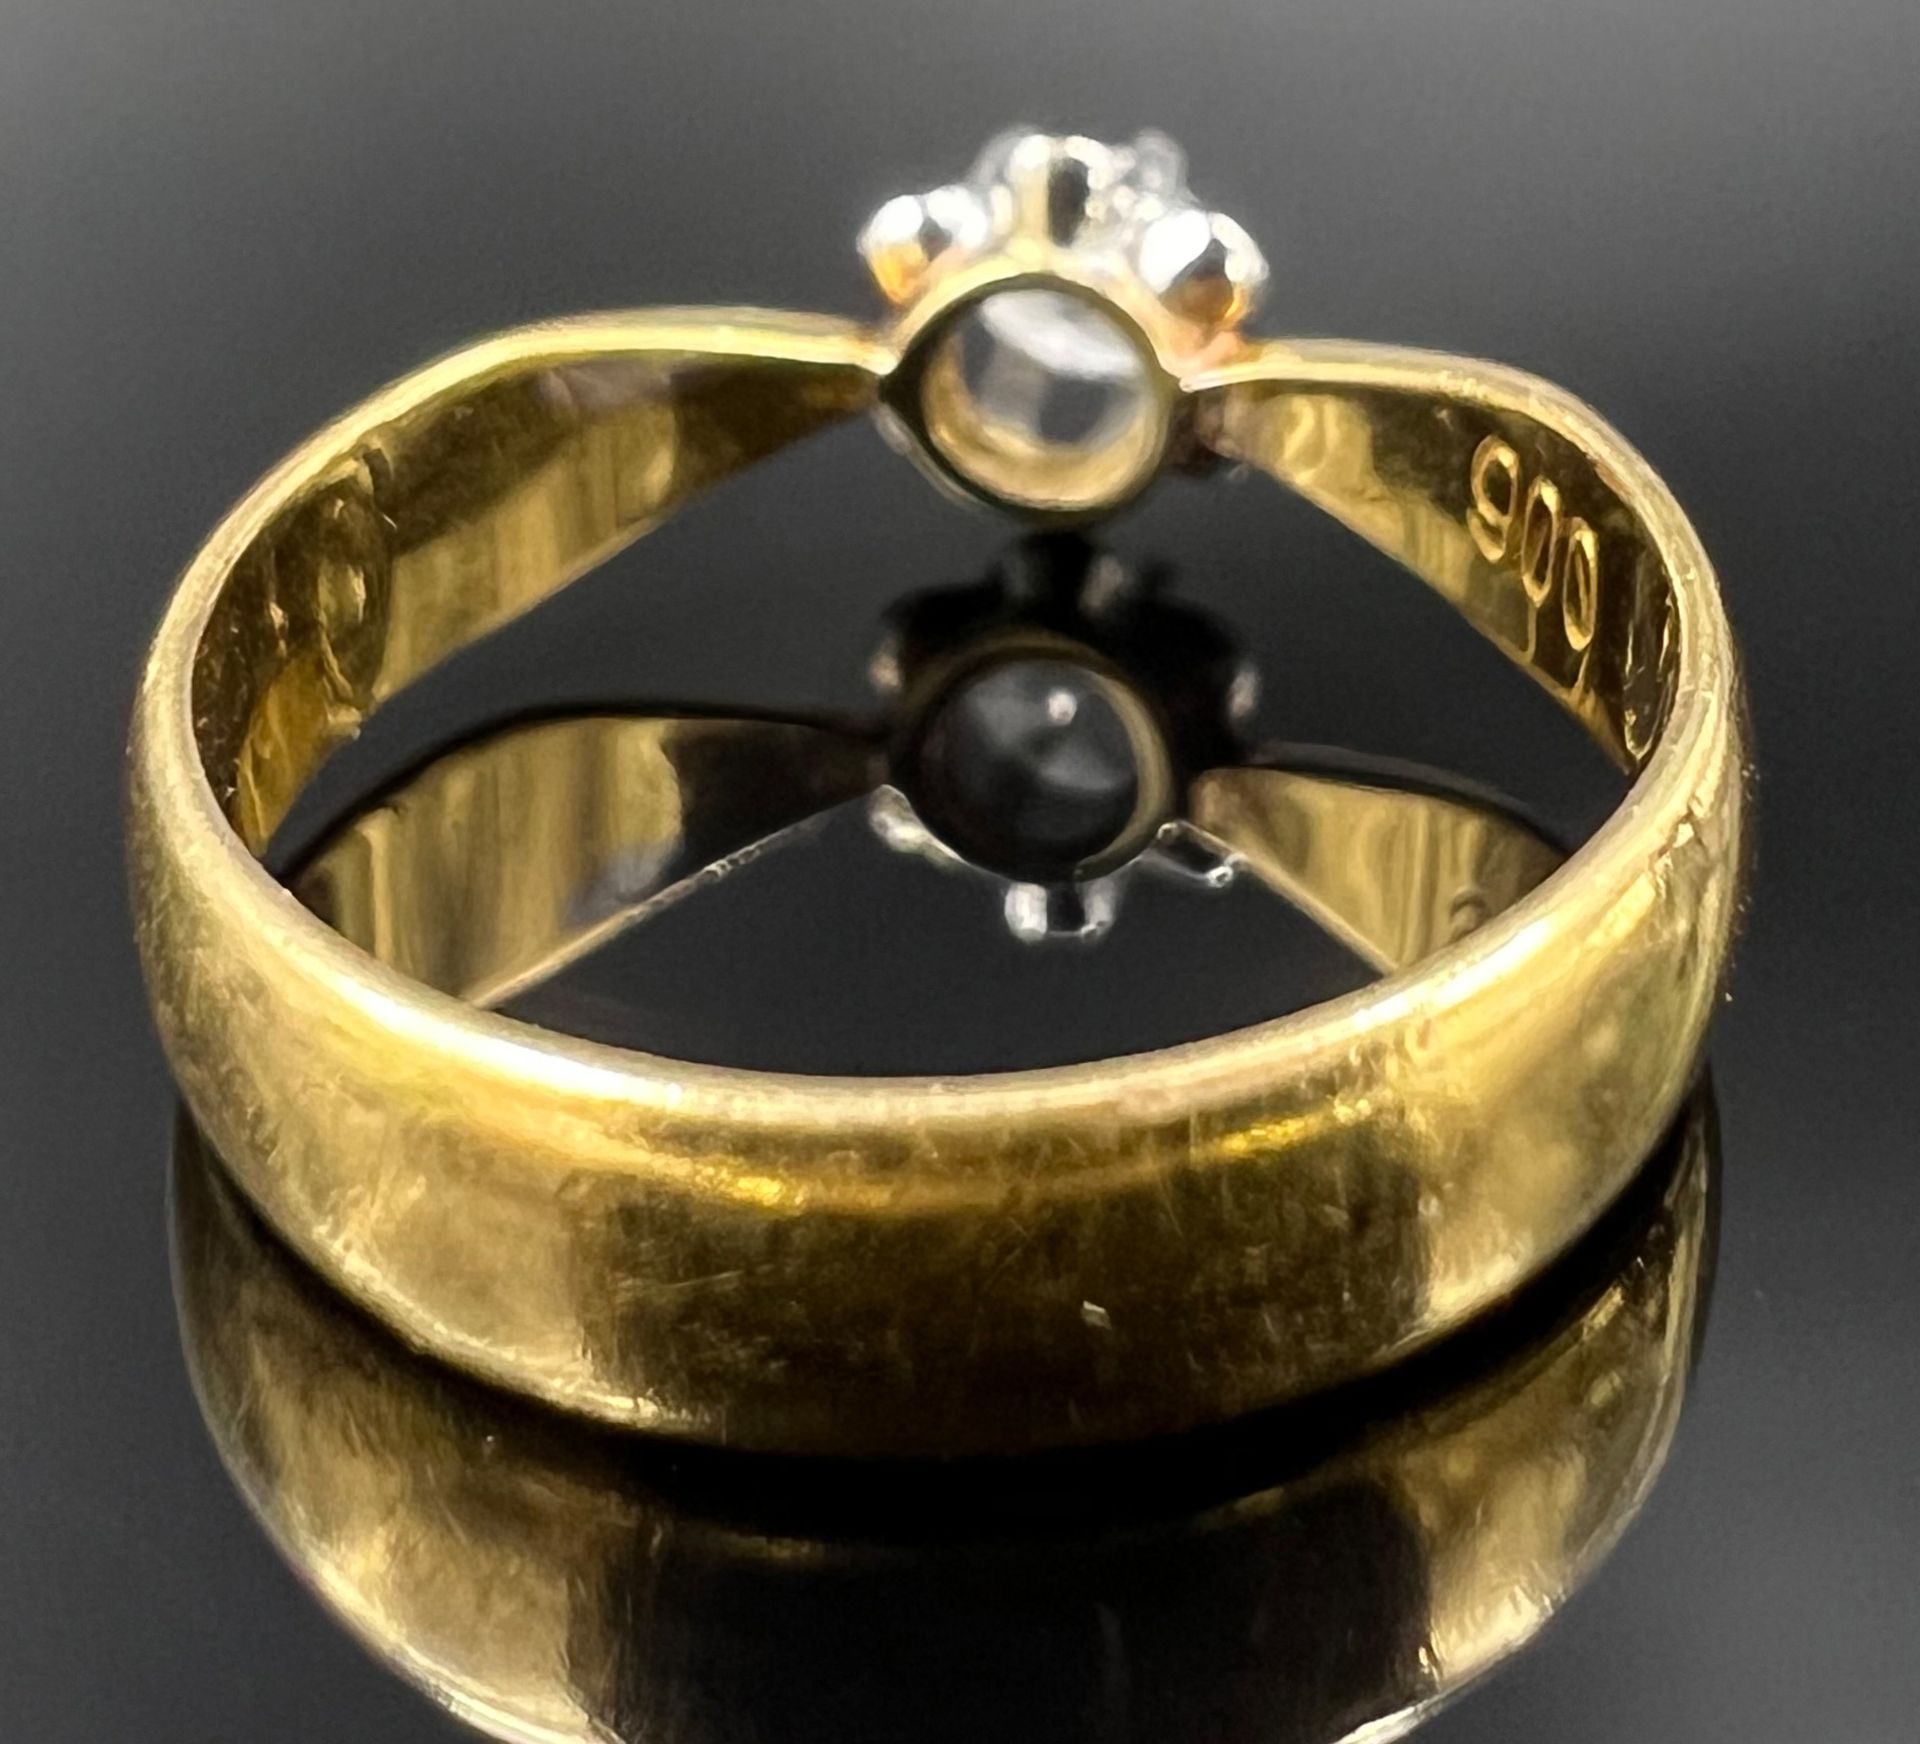 Solitaire ring. 900 yellow gold. 1 diamond of approx. 0.17-0.20 ct. - Image 2 of 8